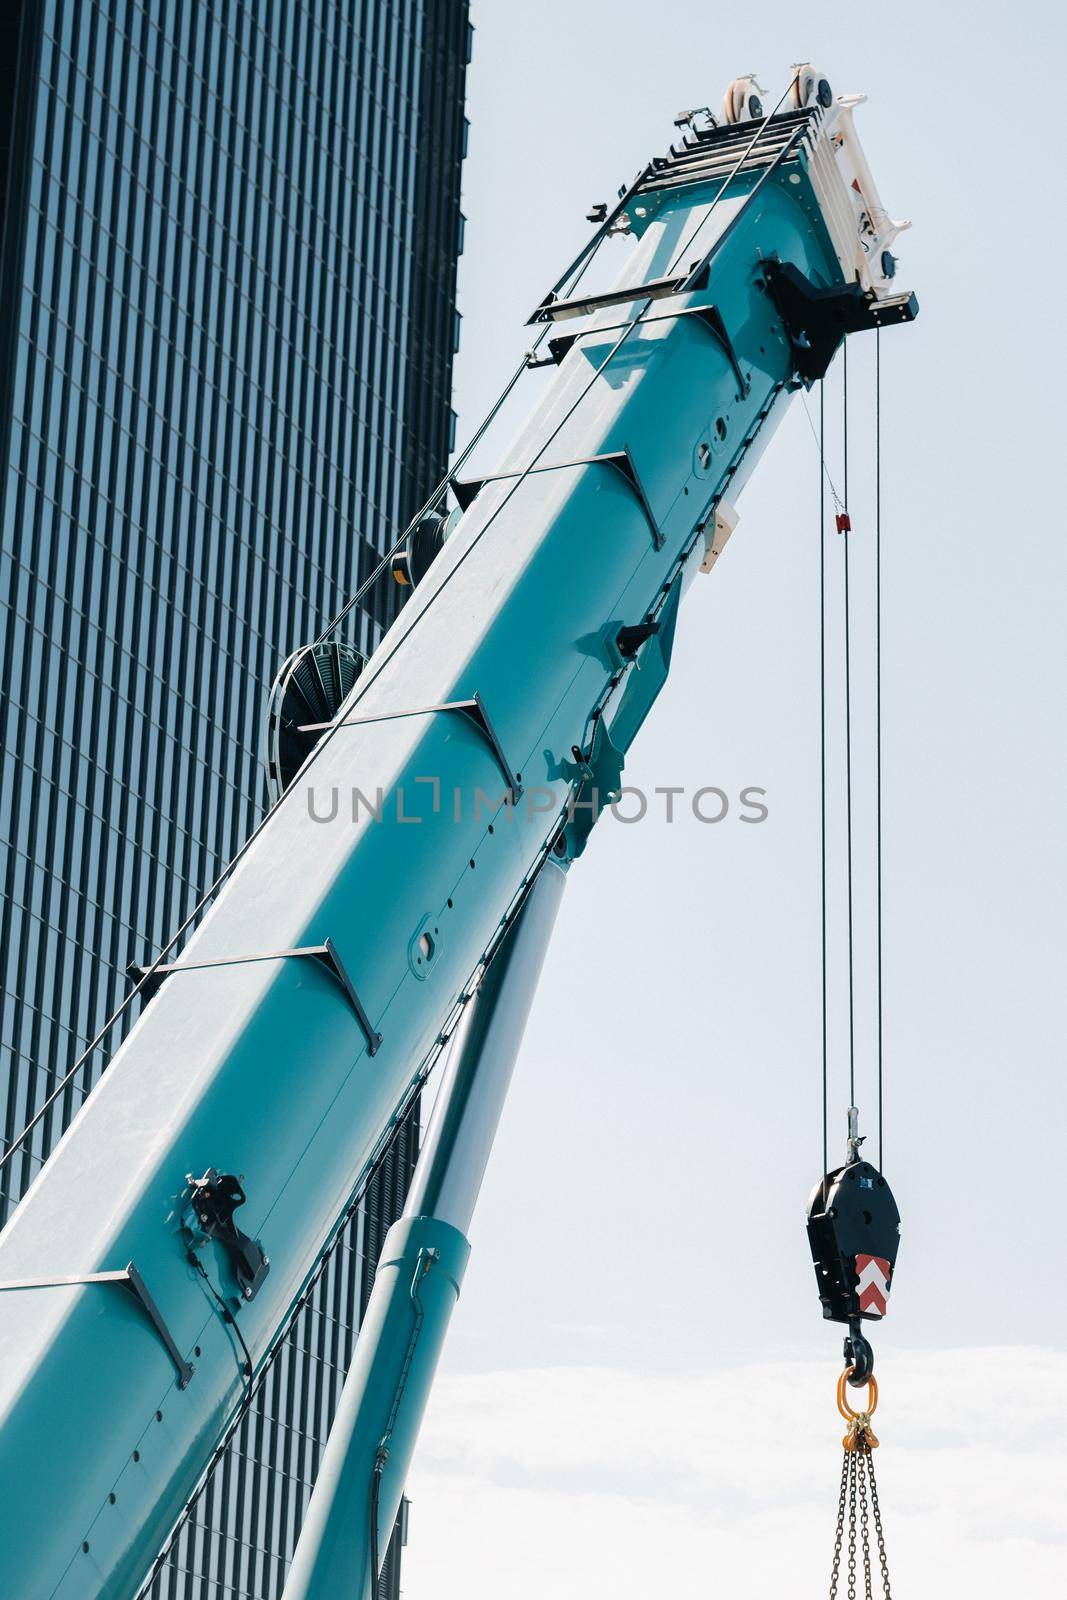 blue crane lifting mechanism with hooks near the glass modern building, crane and hydraulic high lift up to 120 meters by Lobachad